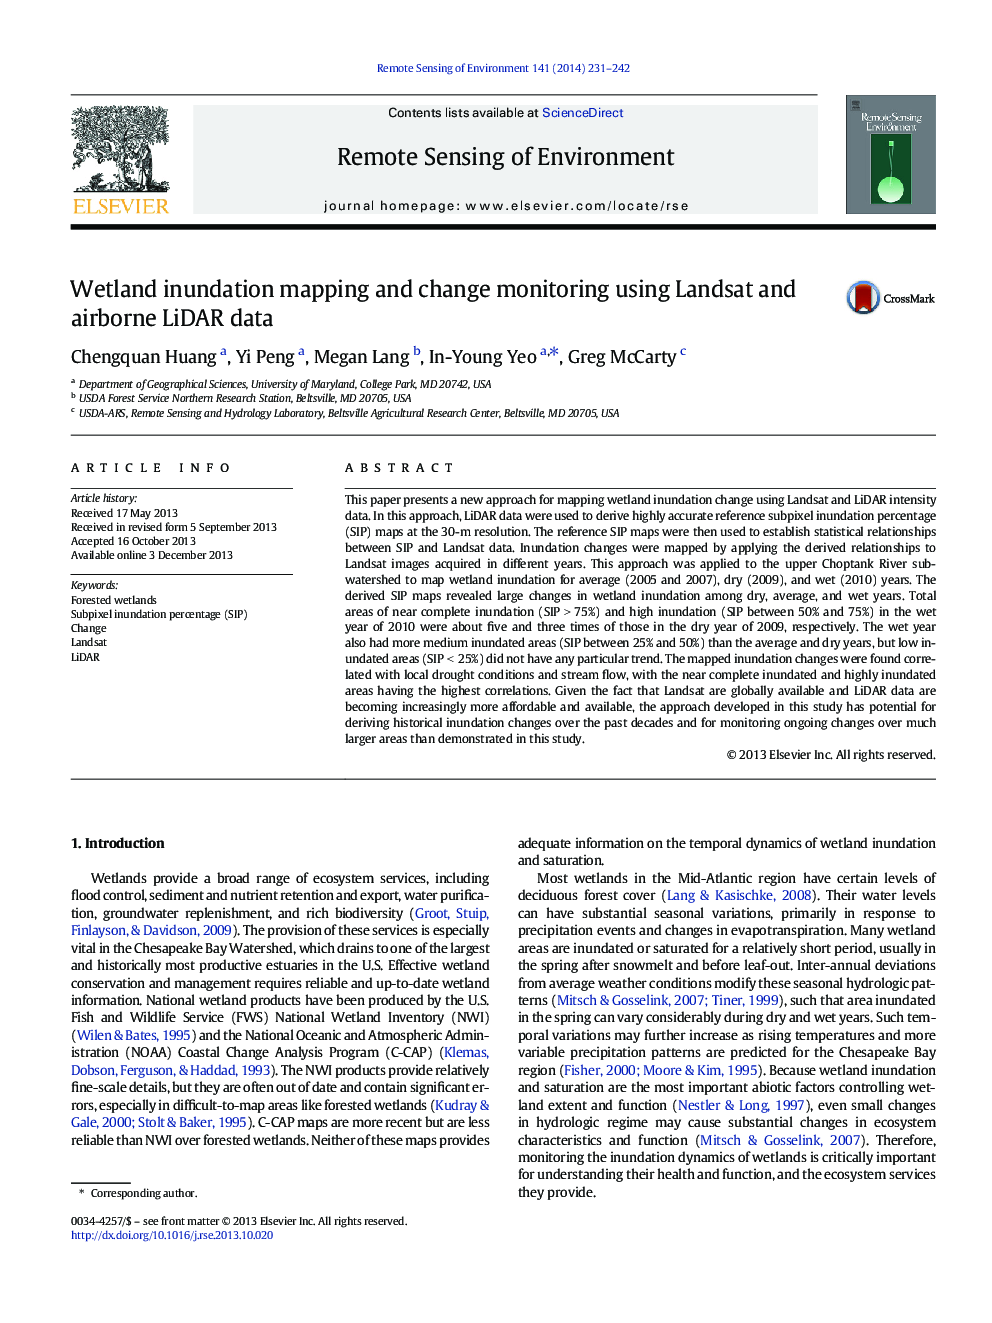 Wetland inundation mapping and change monitoring using Landsat and airborne LiDAR data